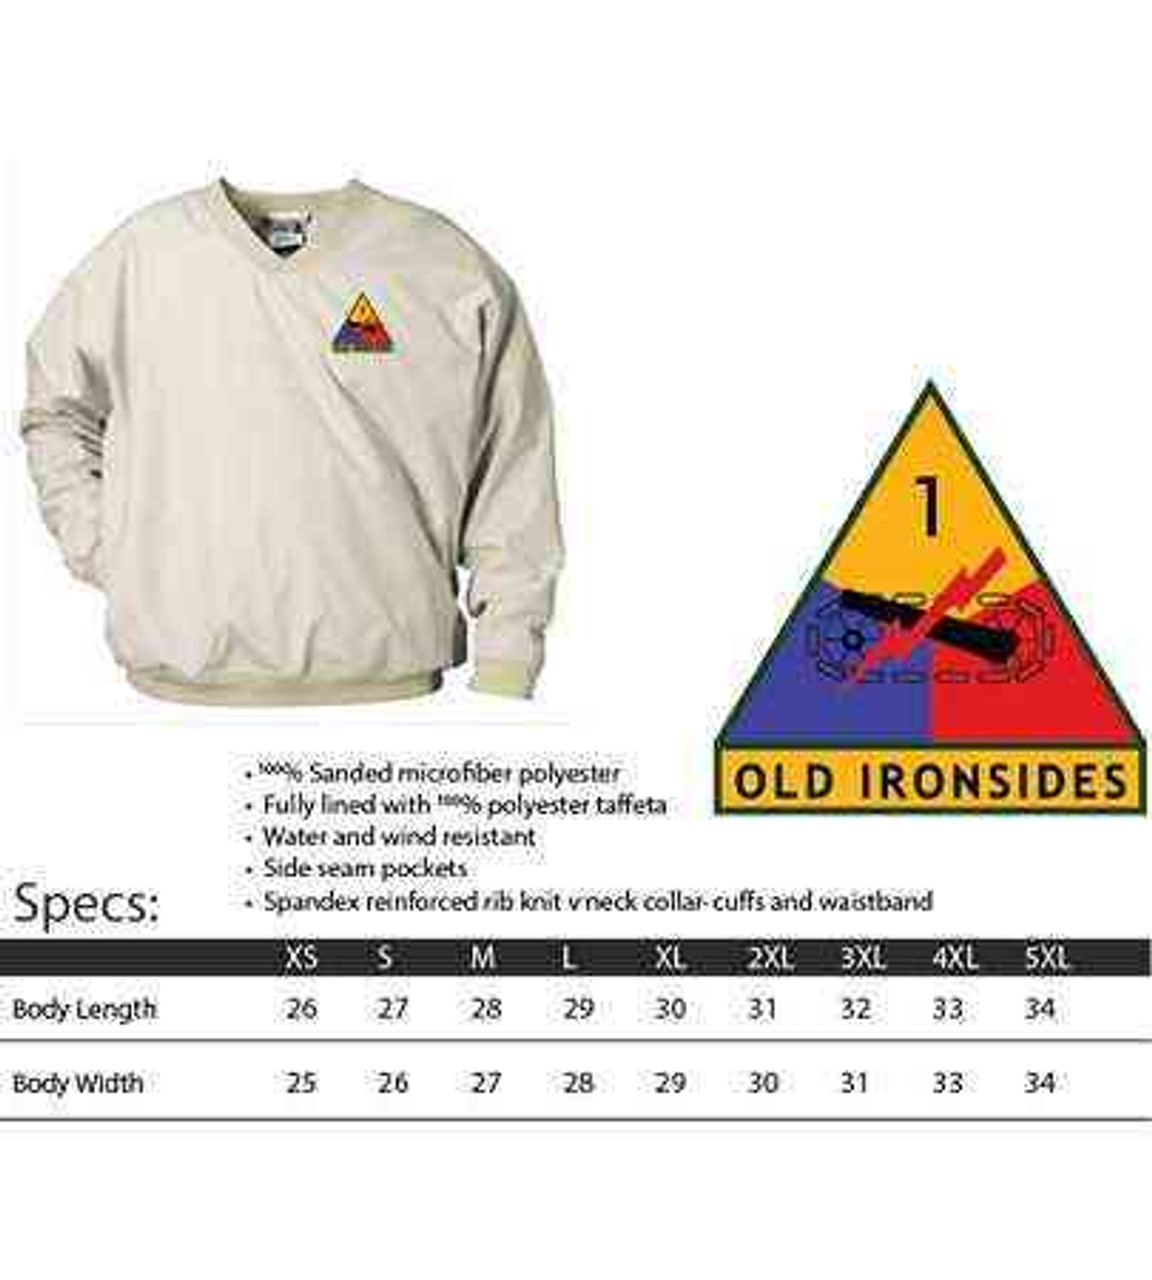 1st armored division old ironsides microfiber windbreaker